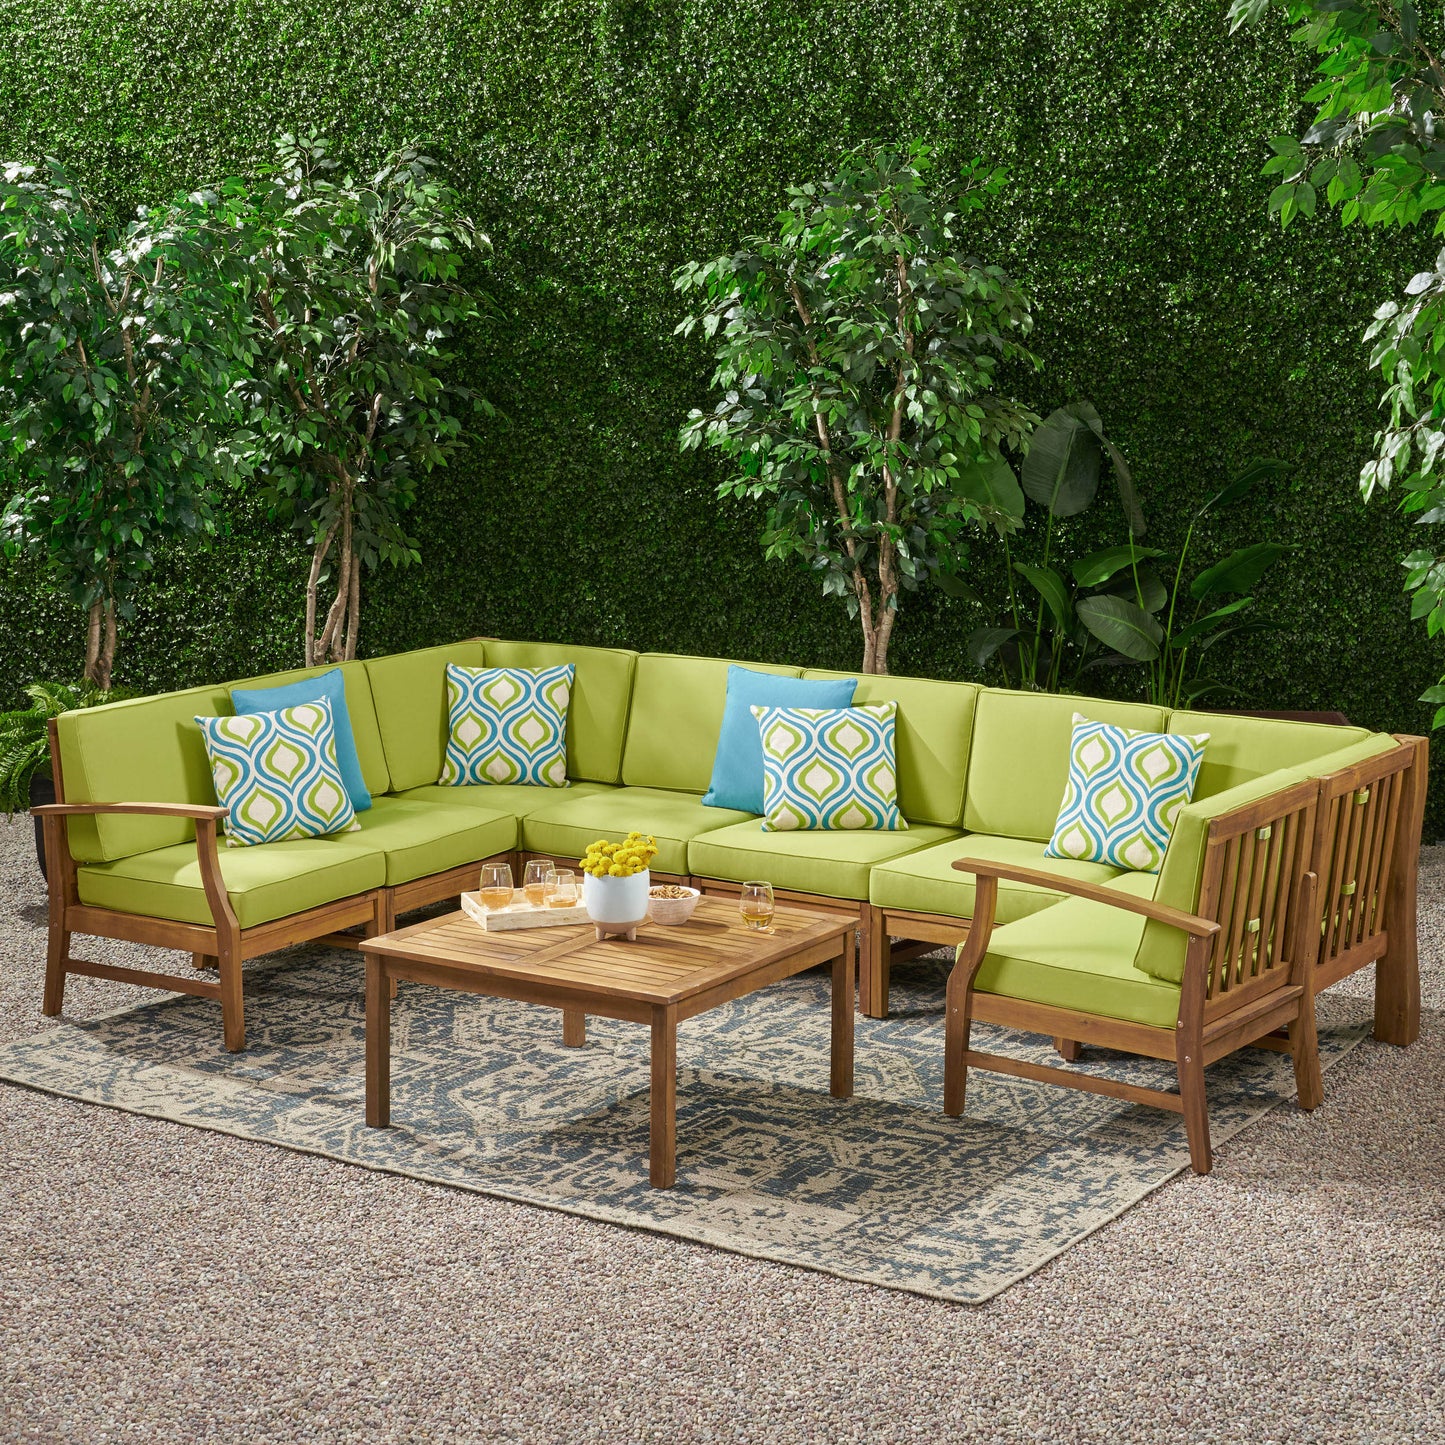 Scarlett Outdoor 8 Seat Teak Finished Acacia Wood Sectional Sofa and Table Set